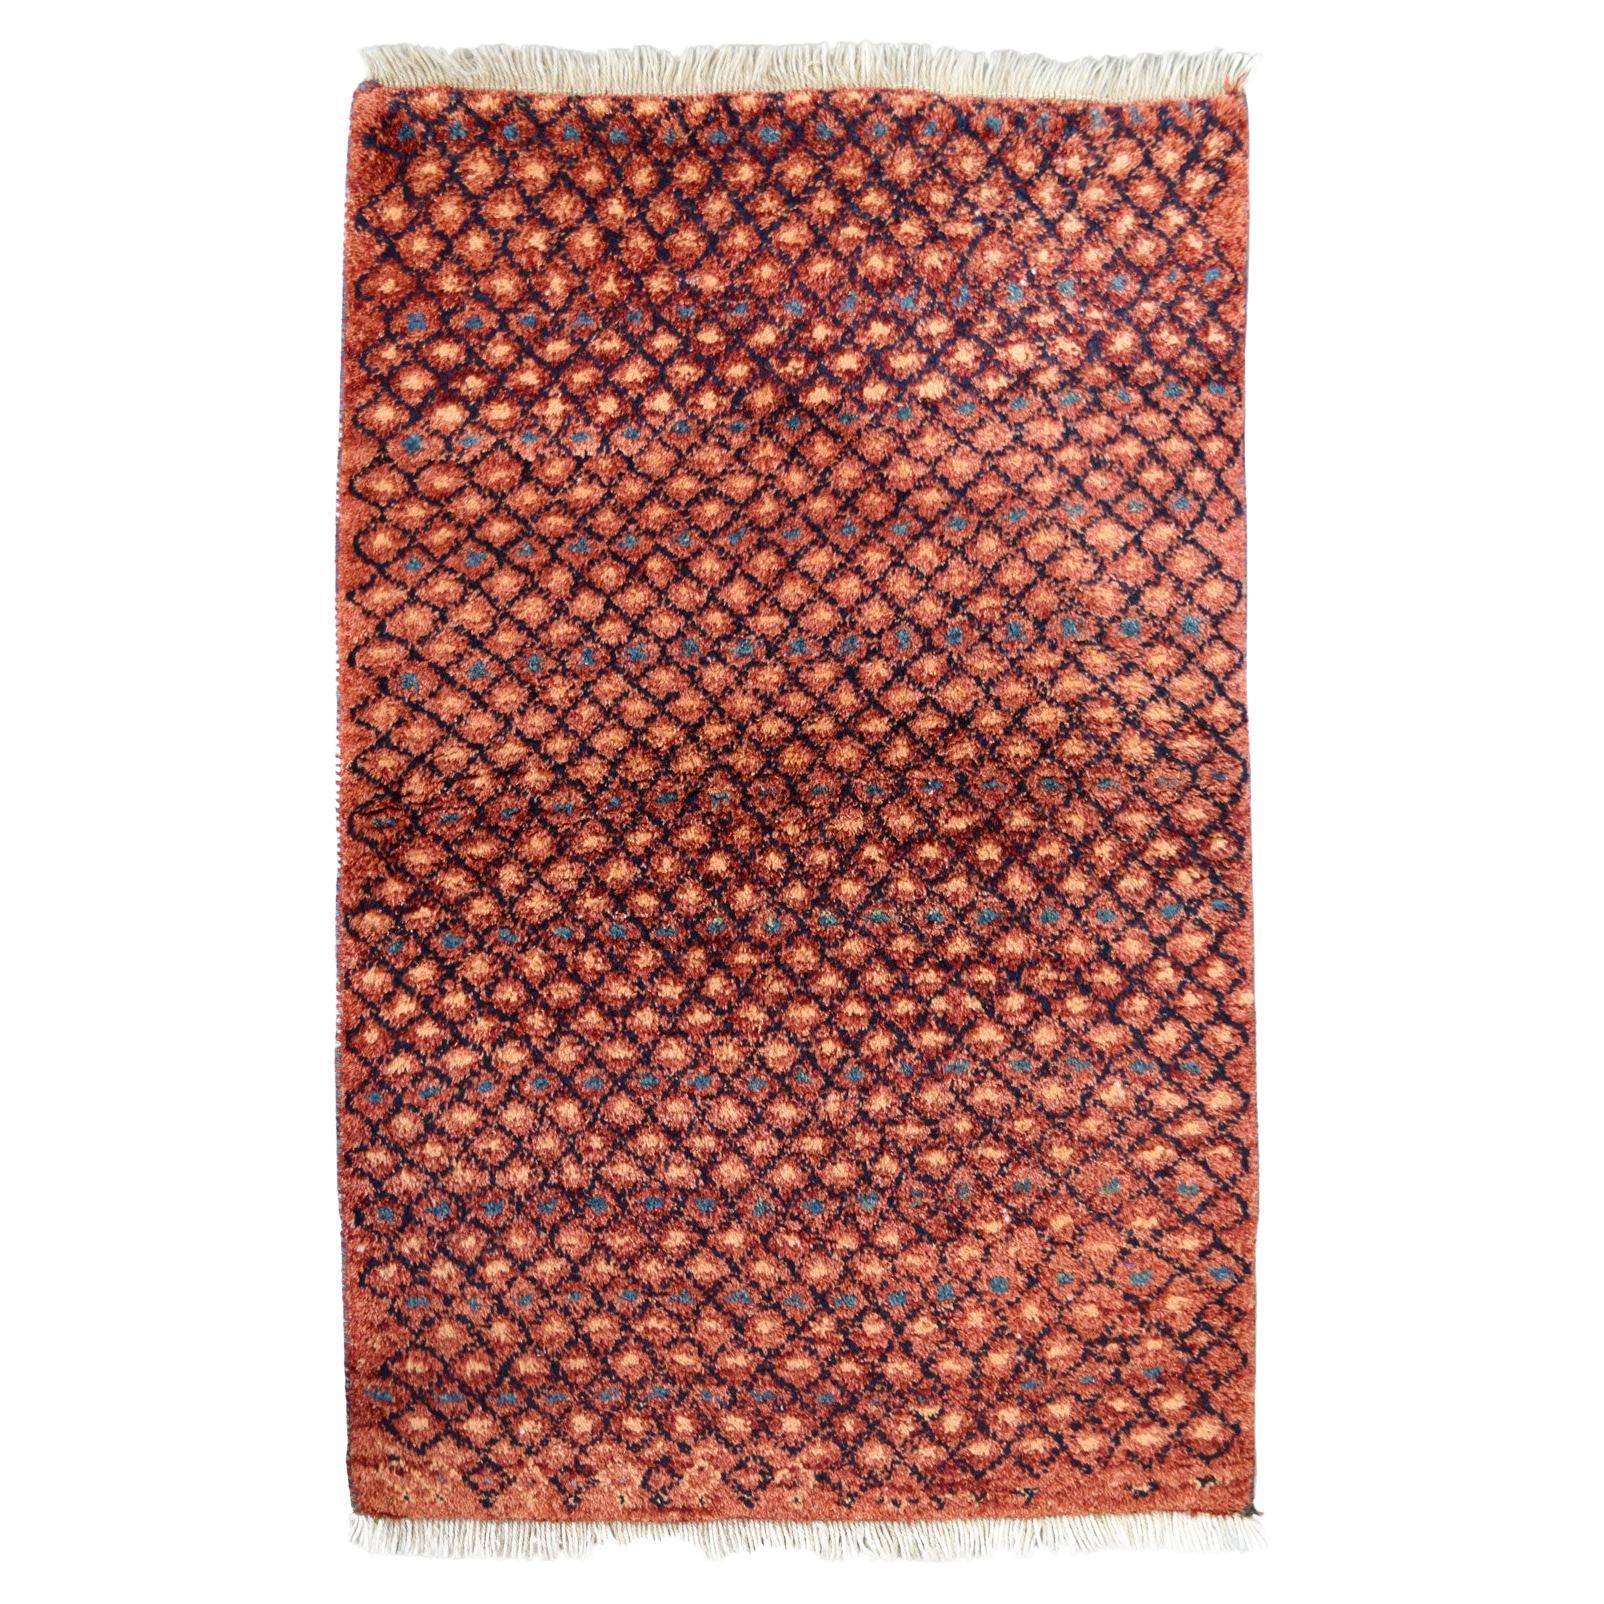 Red All Over Persian Gabbeh Tribal Rug, 3' x 4'